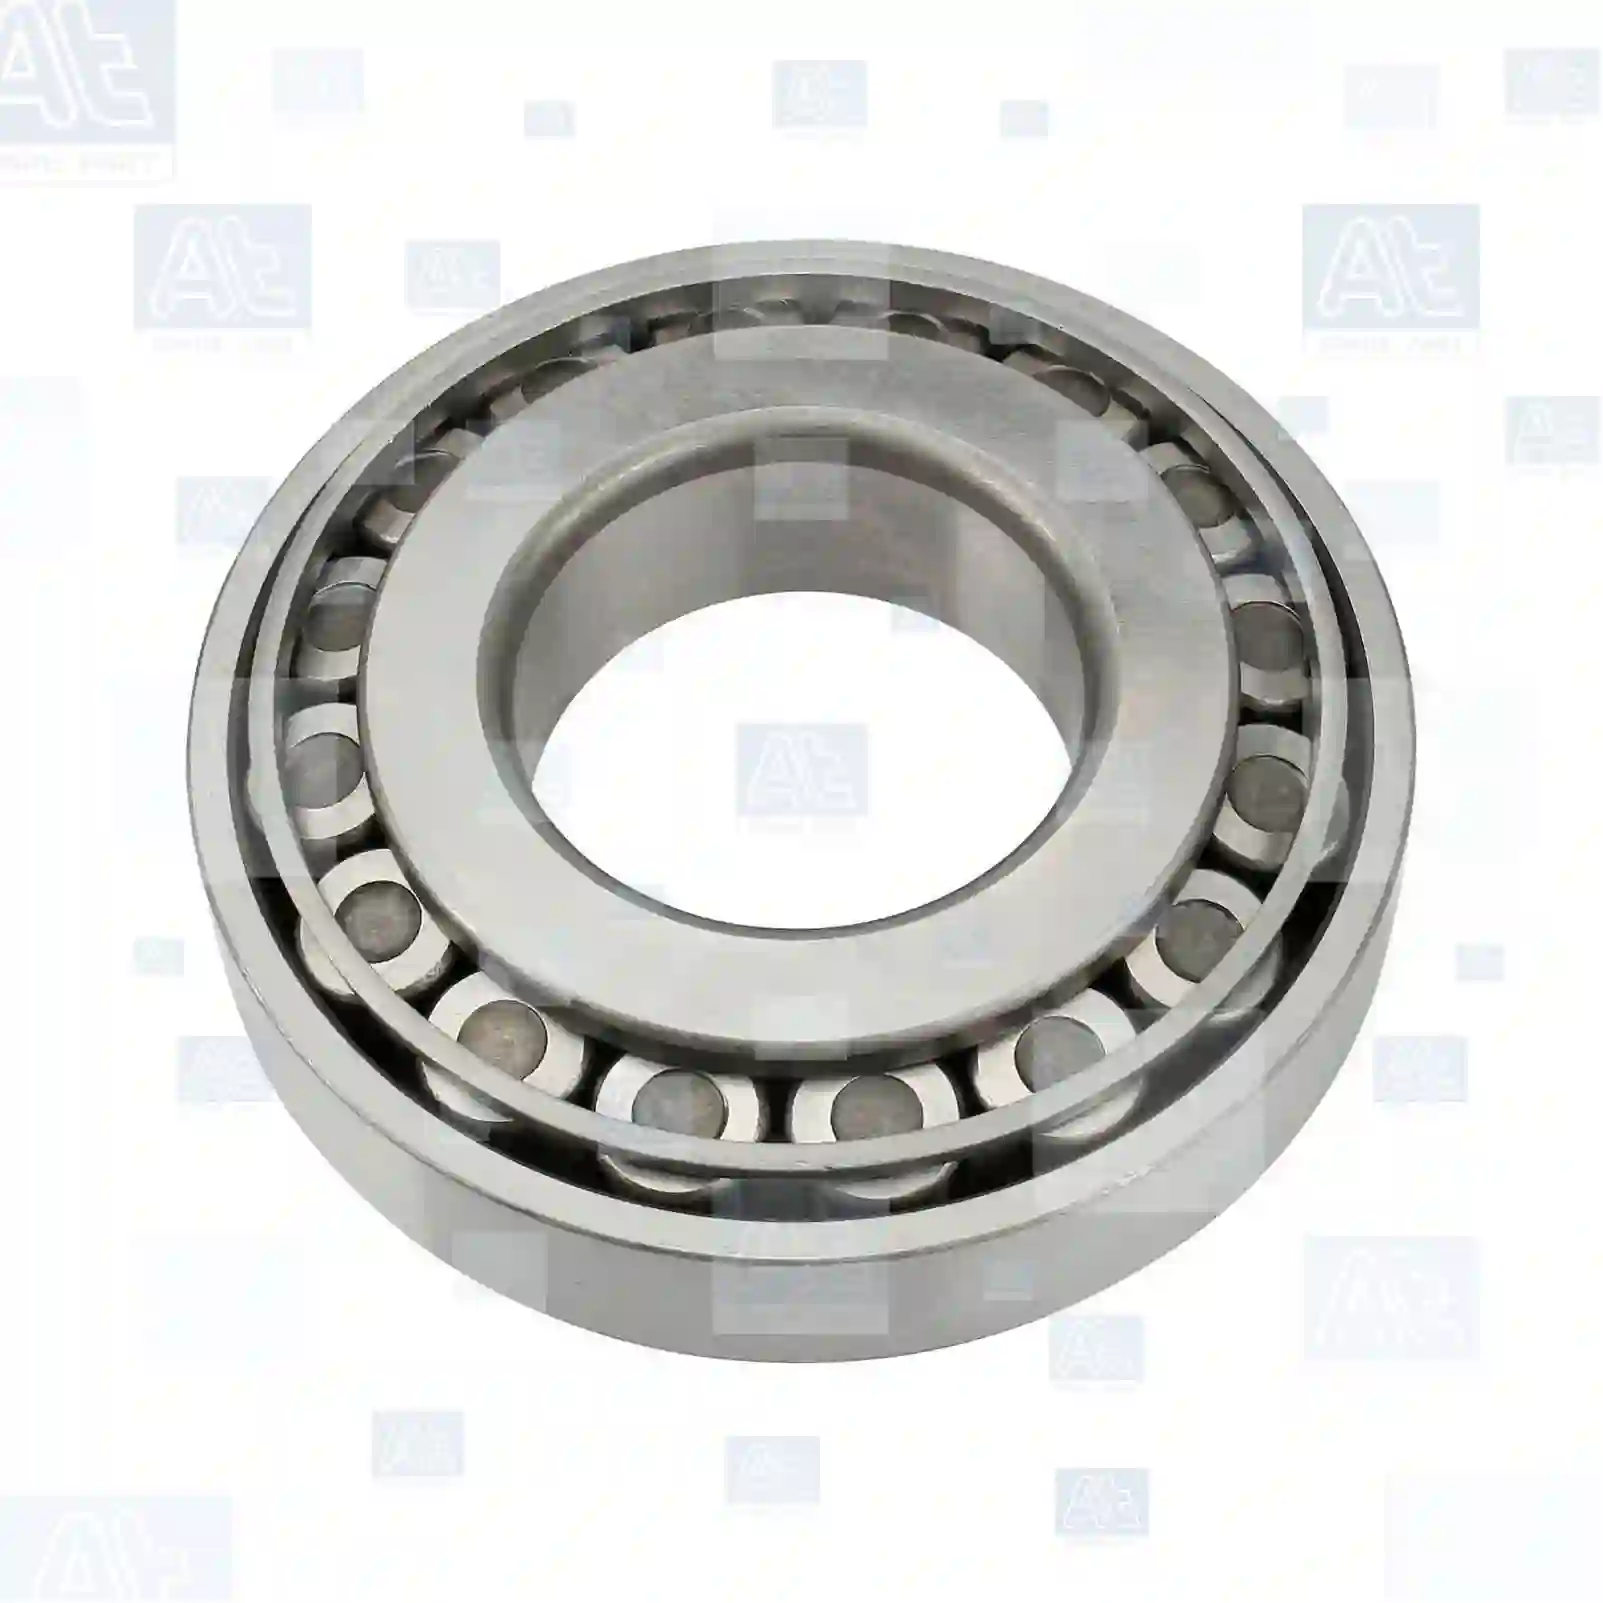 Tapered roller bearing, 77725194, 0264026000, 01102859, 94031454, 1-09812013-0, 1-09812023-0, 1-09812070-0, 01102859, 01109985, 06324890113, 0009810505, 0009818905, 0019819705, 0019899705, 0029810205, 0029816005, 0039816205, 0069816505, 0089818805, 0109810005, 0109812805, 0109812905, 0109815505, 0129818805, 0129819205, 0129819405, 0139818405, 0169811205, 3449817005, MH043008, 38326-90002, 40208-90009, 4200001500, 1357711, 366305, ZG02968-0008 ||  77725194 At Spare Part | Engine, Accelerator Pedal, Camshaft, Connecting Rod, Crankcase, Crankshaft, Cylinder Head, Engine Suspension Mountings, Exhaust Manifold, Exhaust Gas Recirculation, Filter Kits, Flywheel Housing, General Overhaul Kits, Engine, Intake Manifold, Oil Cleaner, Oil Cooler, Oil Filter, Oil Pump, Oil Sump, Piston & Liner, Sensor & Switch, Timing Case, Turbocharger, Cooling System, Belt Tensioner, Coolant Filter, Coolant Pipe, Corrosion Prevention Agent, Drive, Expansion Tank, Fan, Intercooler, Monitors & Gauges, Radiator, Thermostat, V-Belt / Timing belt, Water Pump, Fuel System, Electronical Injector Unit, Feed Pump, Fuel Filter, cpl., Fuel Gauge Sender,  Fuel Line, Fuel Pump, Fuel Tank, Injection Line Kit, Injection Pump, Exhaust System, Clutch & Pedal, Gearbox, Propeller Shaft, Axles, Brake System, Hubs & Wheels, Suspension, Leaf Spring, Universal Parts / Accessories, Steering, Electrical System, Cabin Tapered roller bearing, 77725194, 0264026000, 01102859, 94031454, 1-09812013-0, 1-09812023-0, 1-09812070-0, 01102859, 01109985, 06324890113, 0009810505, 0009818905, 0019819705, 0019899705, 0029810205, 0029816005, 0039816205, 0069816505, 0089818805, 0109810005, 0109812805, 0109812905, 0109815505, 0129818805, 0129819205, 0129819405, 0139818405, 0169811205, 3449817005, MH043008, 38326-90002, 40208-90009, 4200001500, 1357711, 366305, ZG02968-0008 ||  77725194 At Spare Part | Engine, Accelerator Pedal, Camshaft, Connecting Rod, Crankcase, Crankshaft, Cylinder Head, Engine Suspension Mountings, Exhaust Manifold, Exhaust Gas Recirculation, Filter Kits, Flywheel Housing, General Overhaul Kits, Engine, Intake Manifold, Oil Cleaner, Oil Cooler, Oil Filter, Oil Pump, Oil Sump, Piston & Liner, Sensor & Switch, Timing Case, Turbocharger, Cooling System, Belt Tensioner, Coolant Filter, Coolant Pipe, Corrosion Prevention Agent, Drive, Expansion Tank, Fan, Intercooler, Monitors & Gauges, Radiator, Thermostat, V-Belt / Timing belt, Water Pump, Fuel System, Electronical Injector Unit, Feed Pump, Fuel Filter, cpl., Fuel Gauge Sender,  Fuel Line, Fuel Pump, Fuel Tank, Injection Line Kit, Injection Pump, Exhaust System, Clutch & Pedal, Gearbox, Propeller Shaft, Axles, Brake System, Hubs & Wheels, Suspension, Leaf Spring, Universal Parts / Accessories, Steering, Electrical System, Cabin